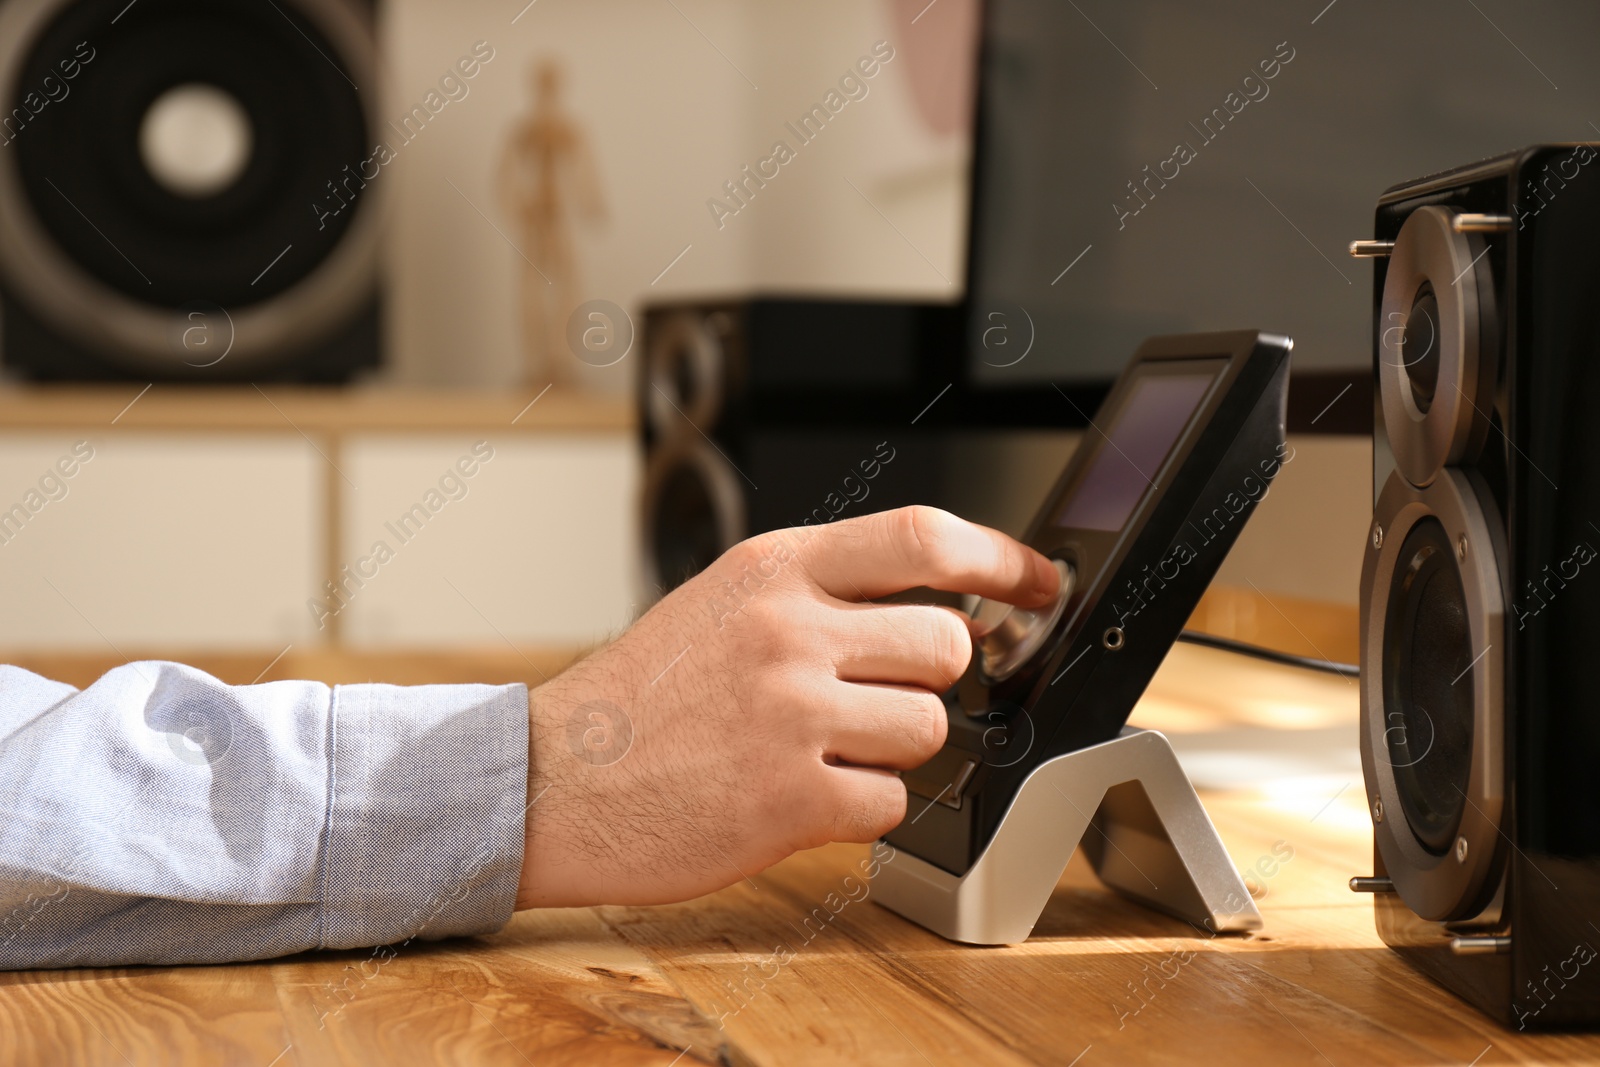 Photo of Man using remote to control audio speakers at table indoors, closeup